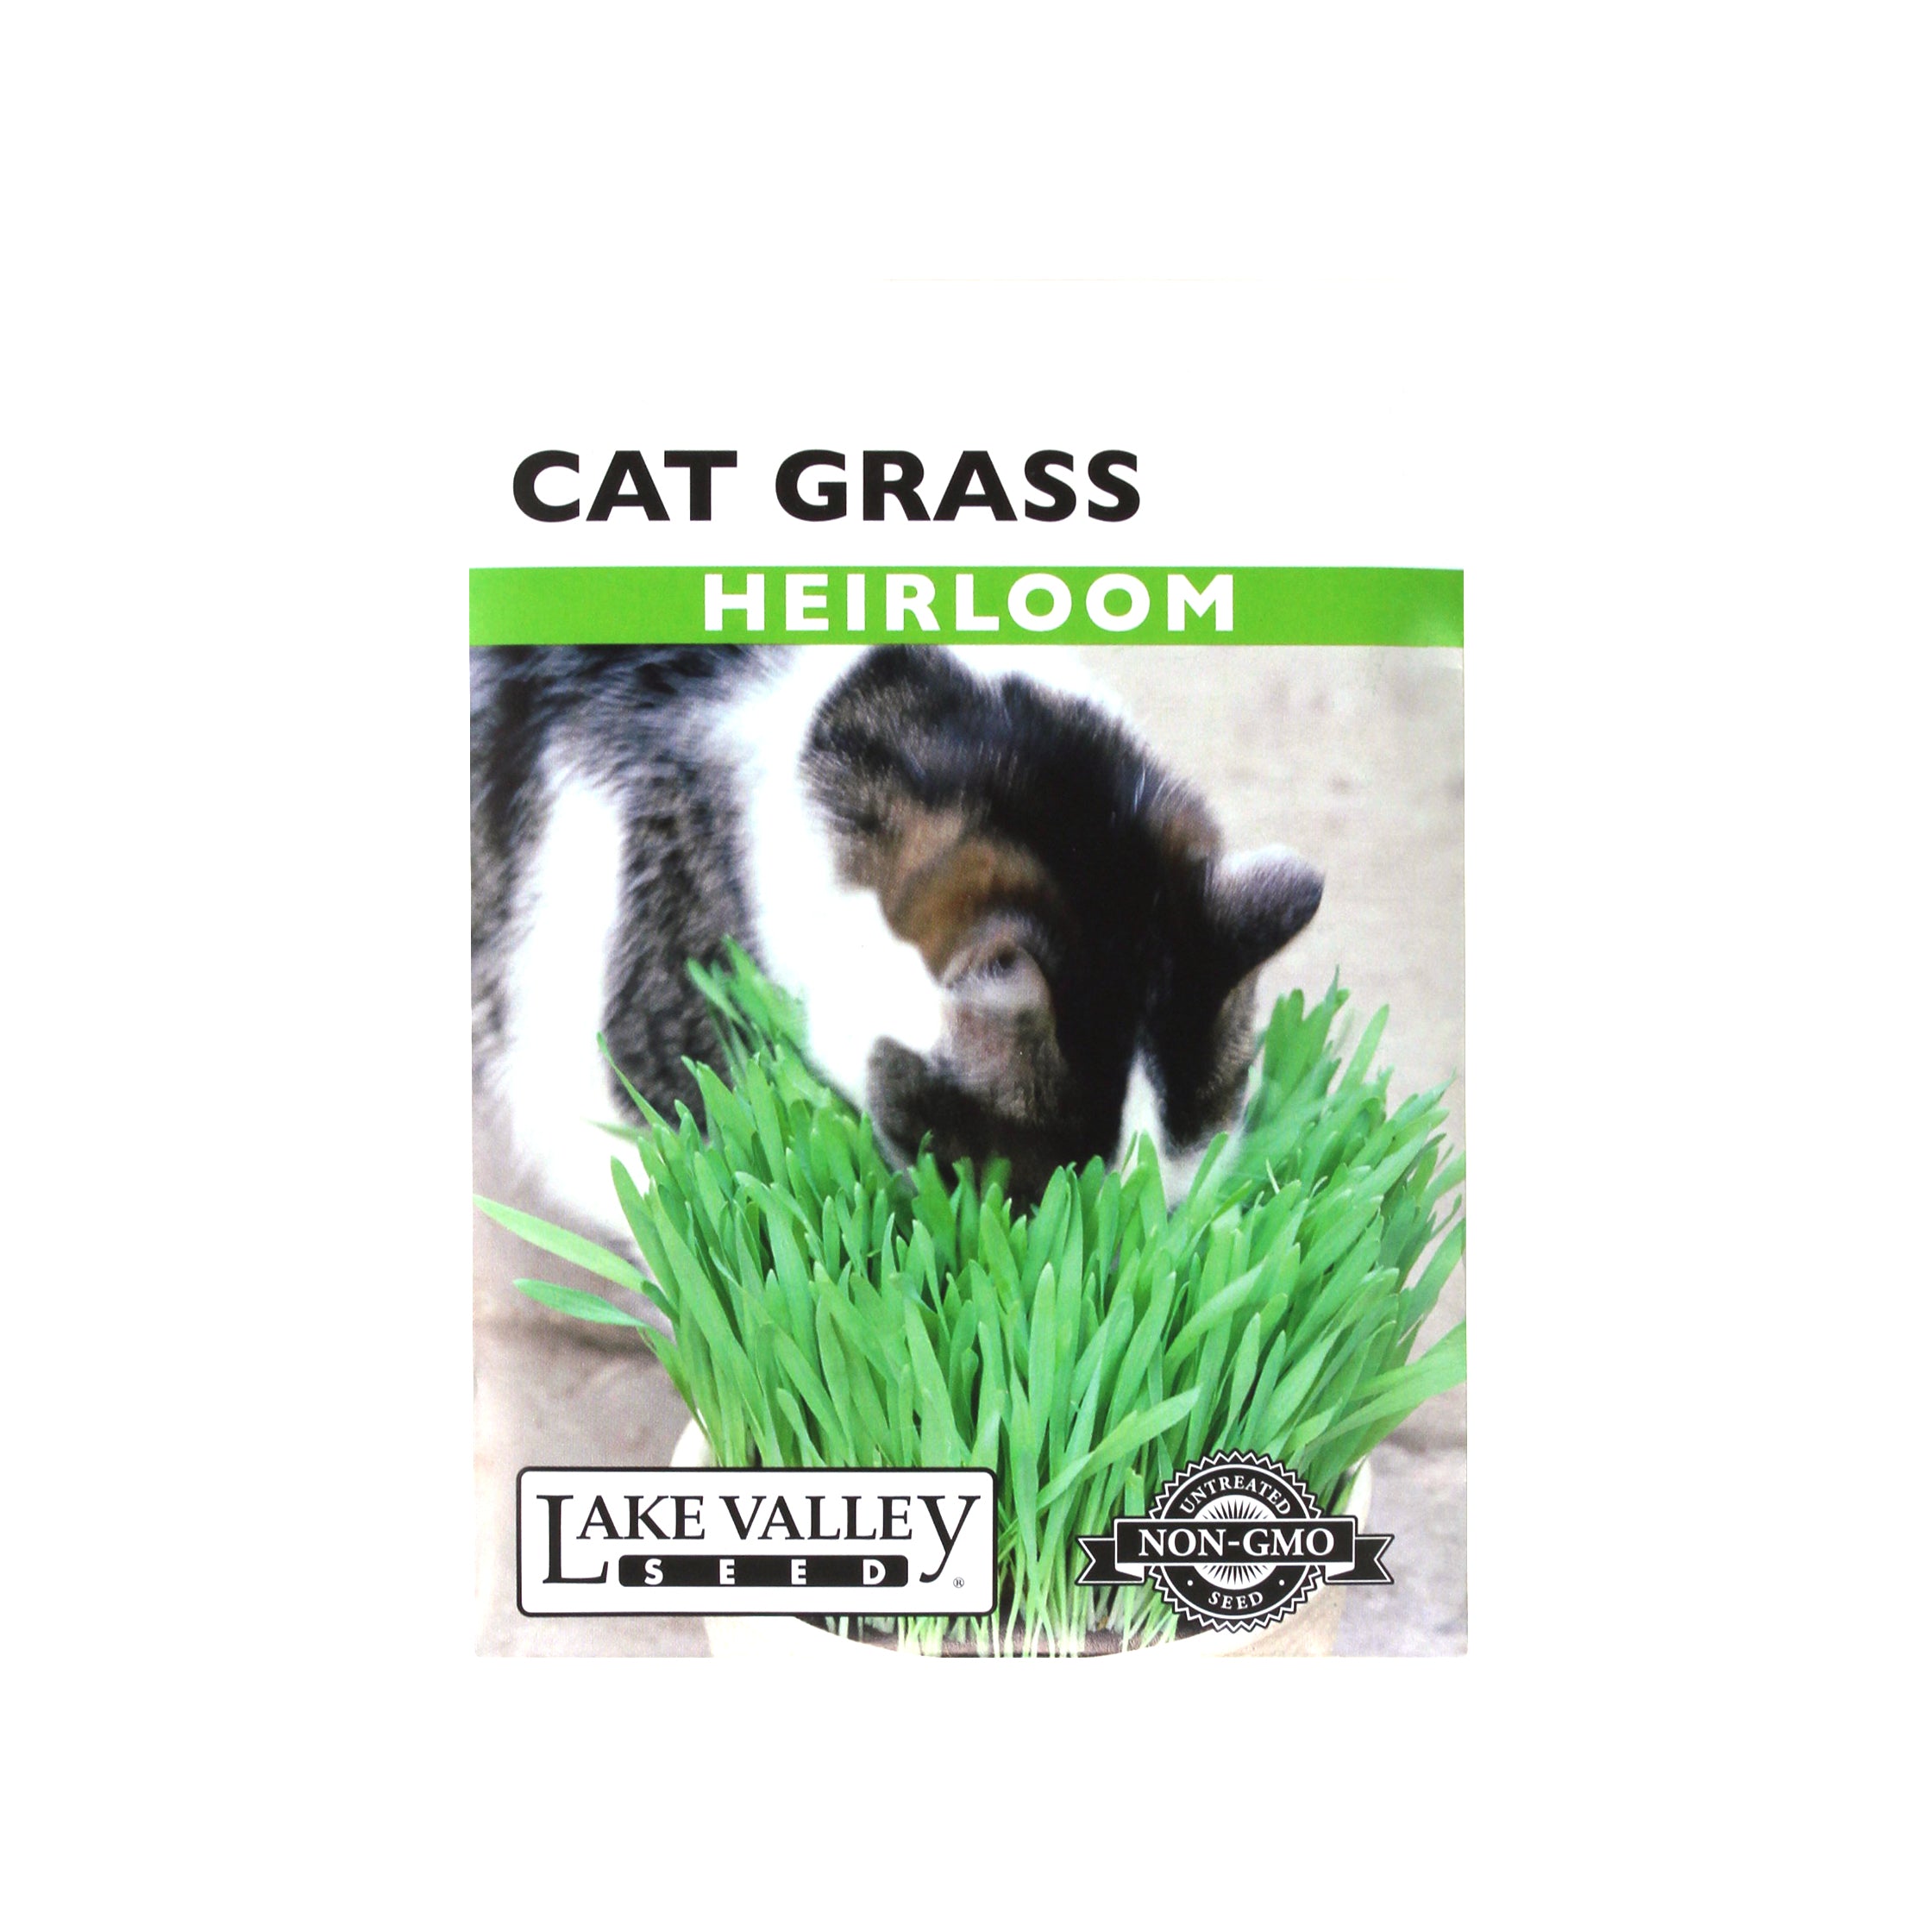 Lake Valley Seed Cat Grass Heirloom, 10g